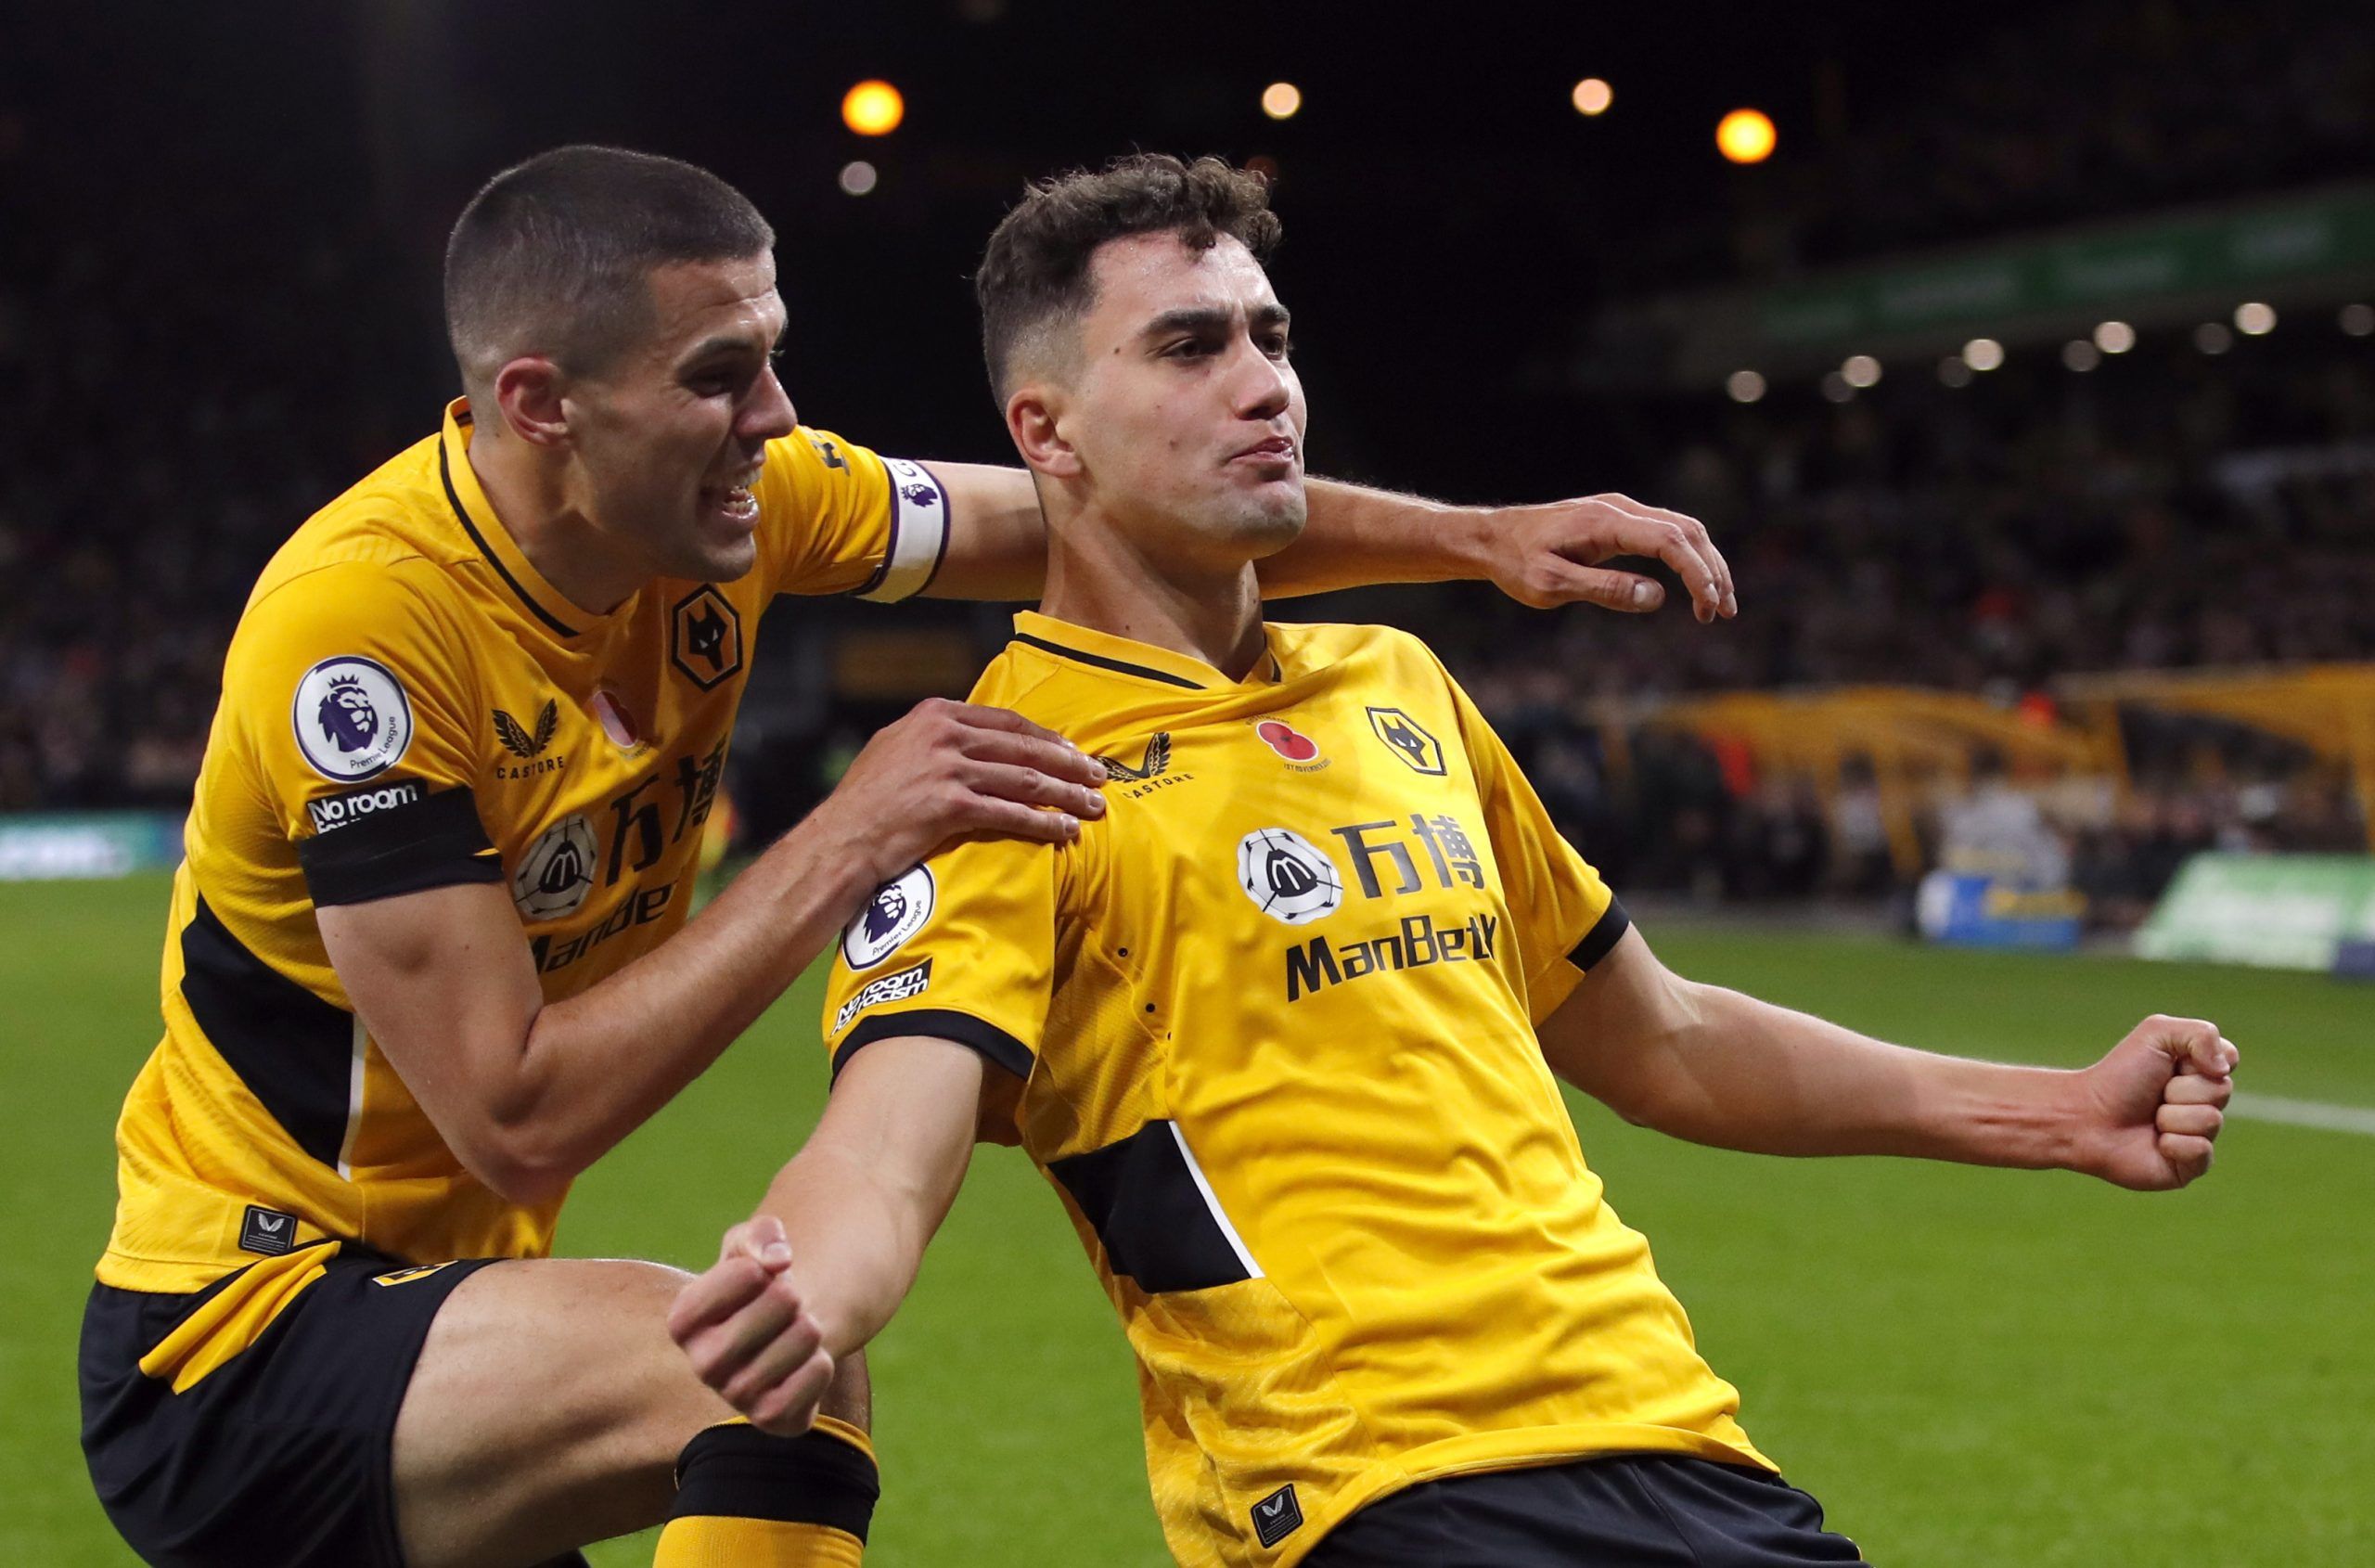 kilman-coady-bruno-lage-wolves-transfer-rumours-transfer-news-latest-molineux-news-premier-league-transferSoccer Football - Premier League - Wolverhampton Wanderers v Everton - Molineux Stadium, Wolverhampton, Britain - November 1, 2021 Wolverhampton Wanderers' Max Kilman celebrates scoring their first goal with Conor Coady Action Images via Reuters/Andrew Couldridge EDITORIAL USE ONLY. No use with unauthorized audio, video, data, fixture lists, club/league logos or 'live' services. Online in-ma